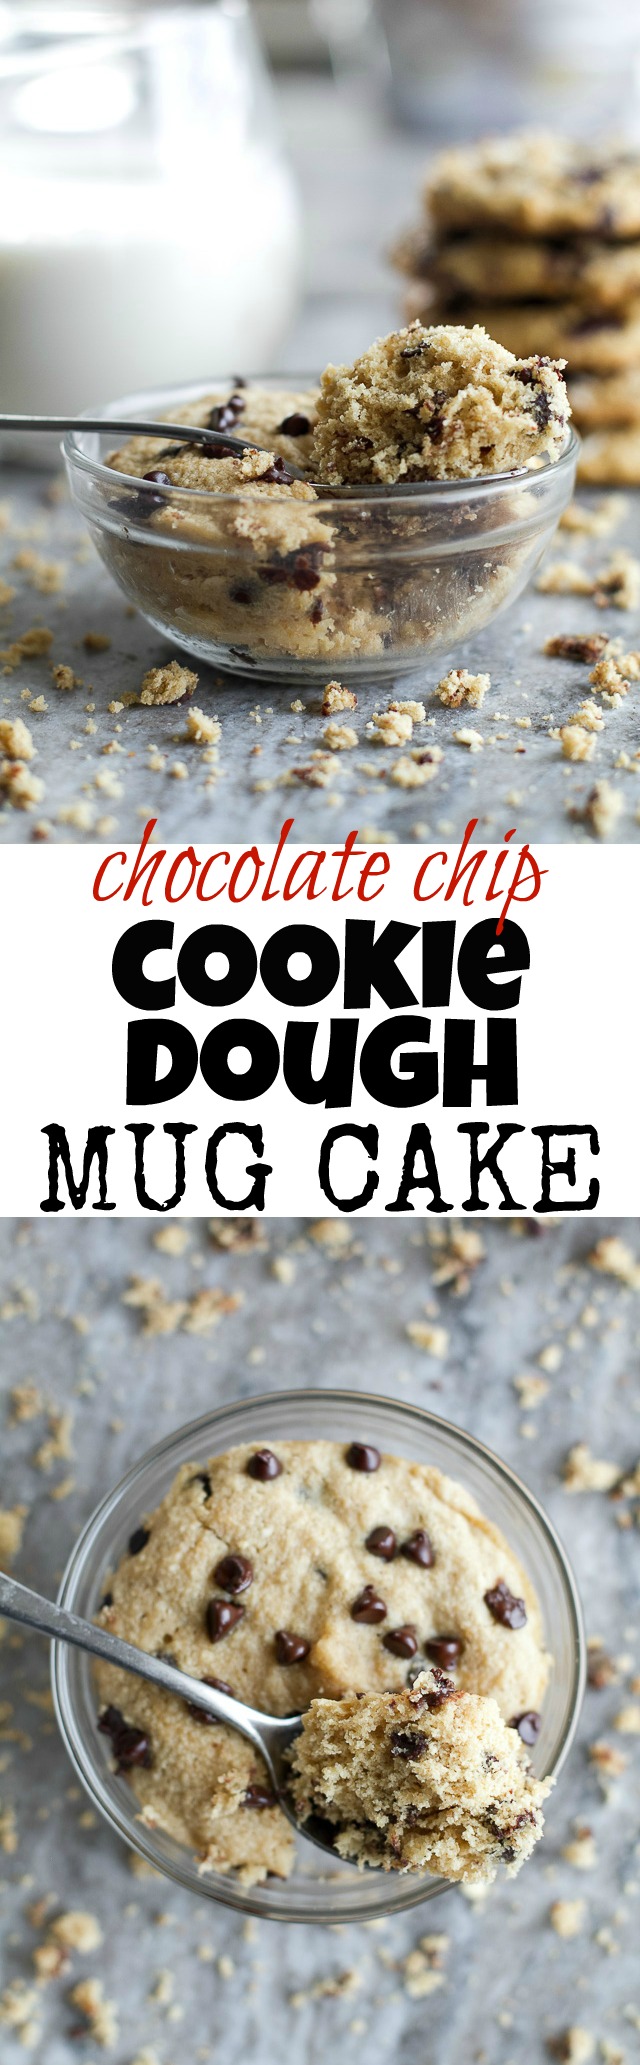 Chocolate Chip Cookie Dough Mug Cake | running with spoons